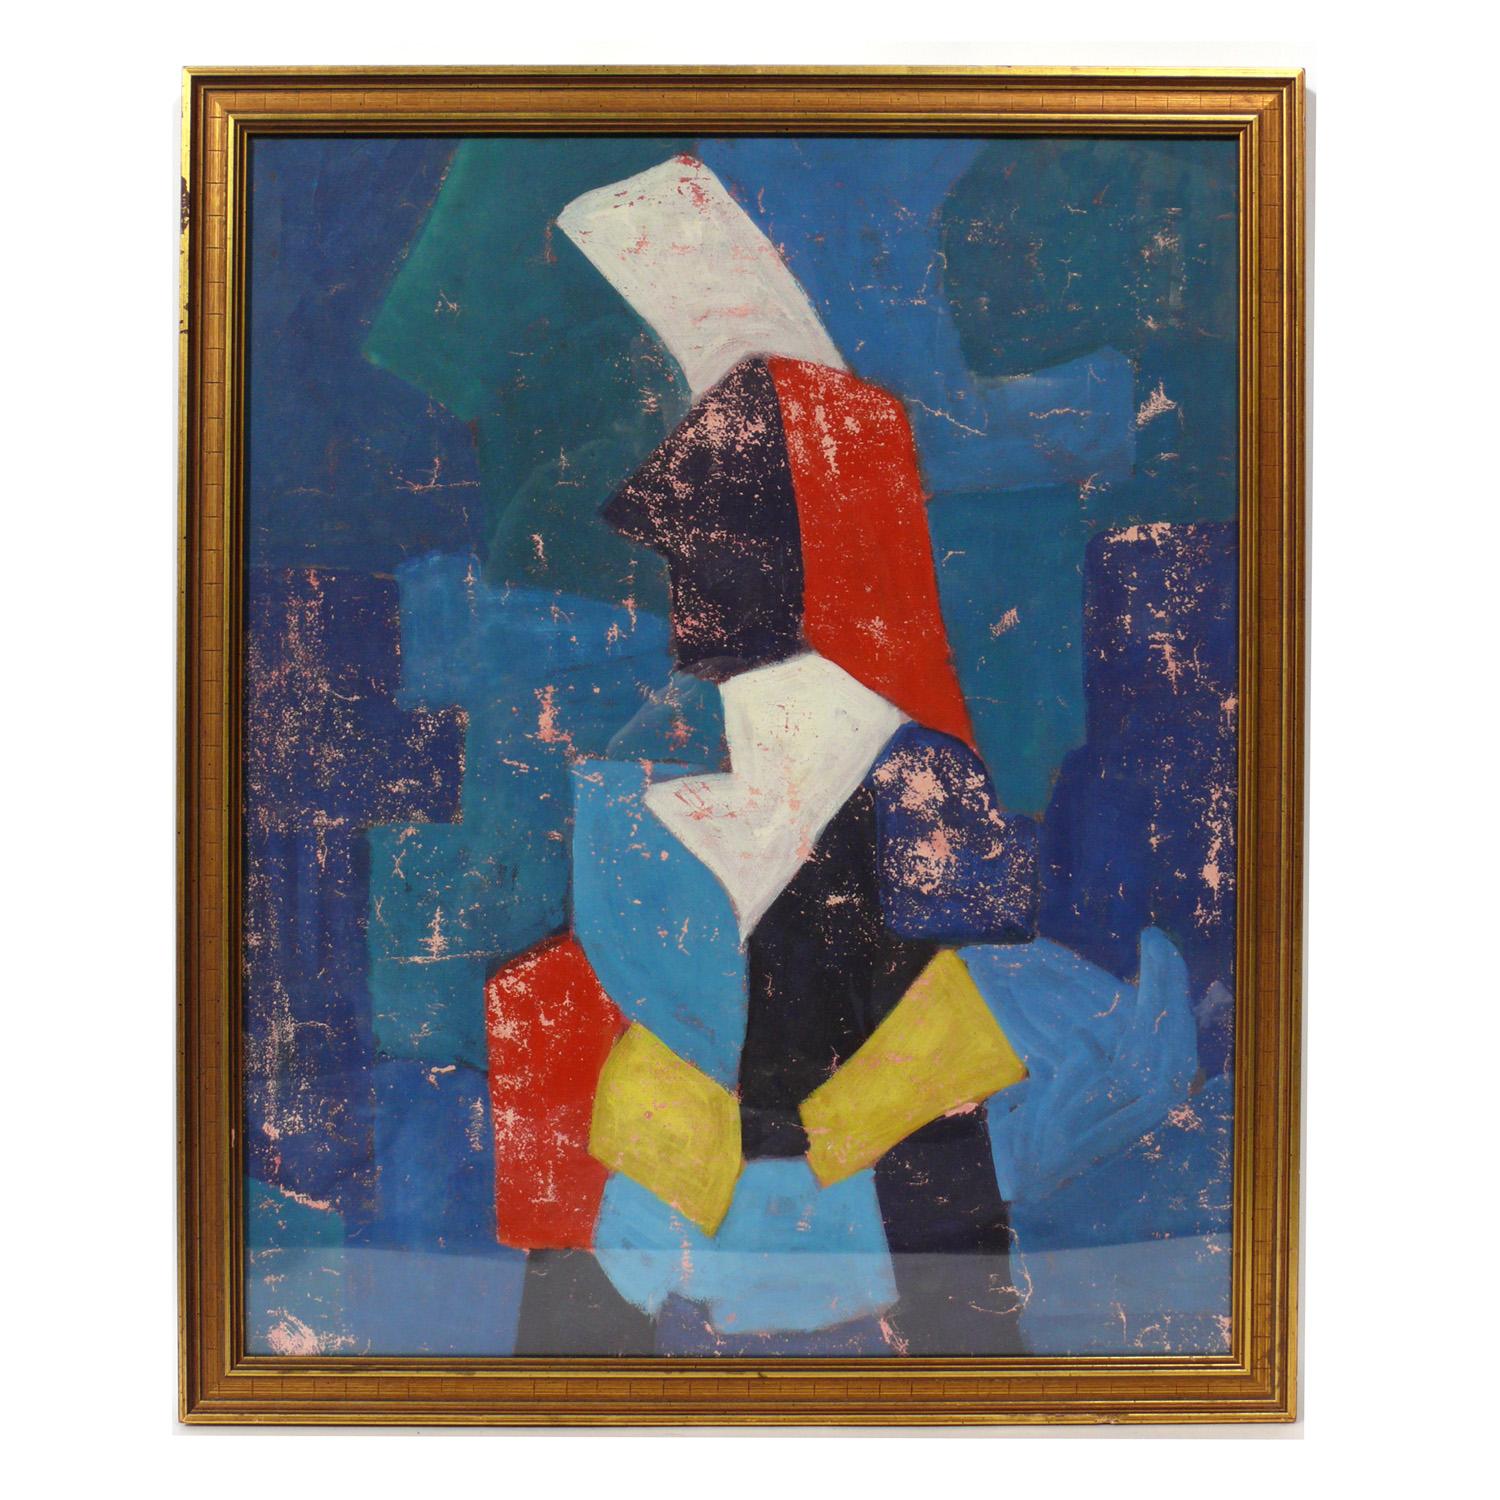 French Selection of Colorful Modern Art or Gallery Wall For Sale